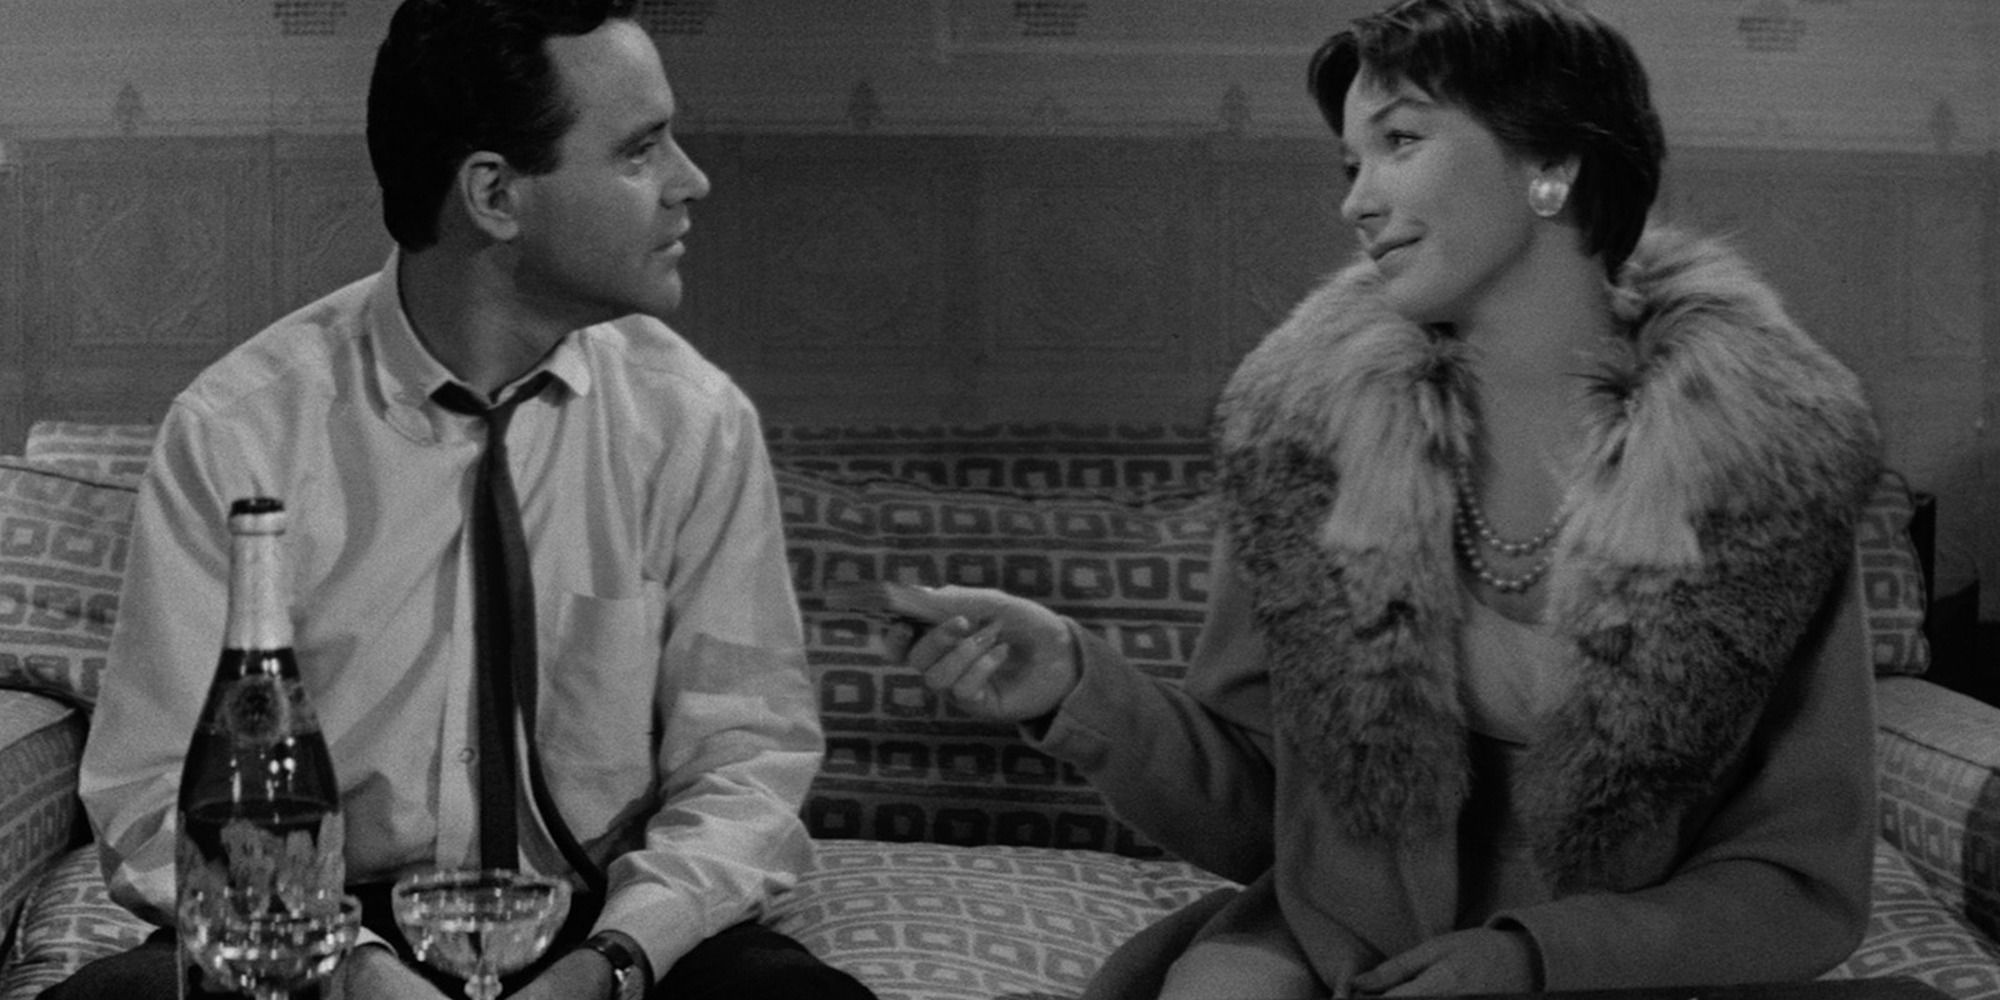 The Apartment's Jack Lemmon and Shirley MacLaine sitting together on a couch playing cards